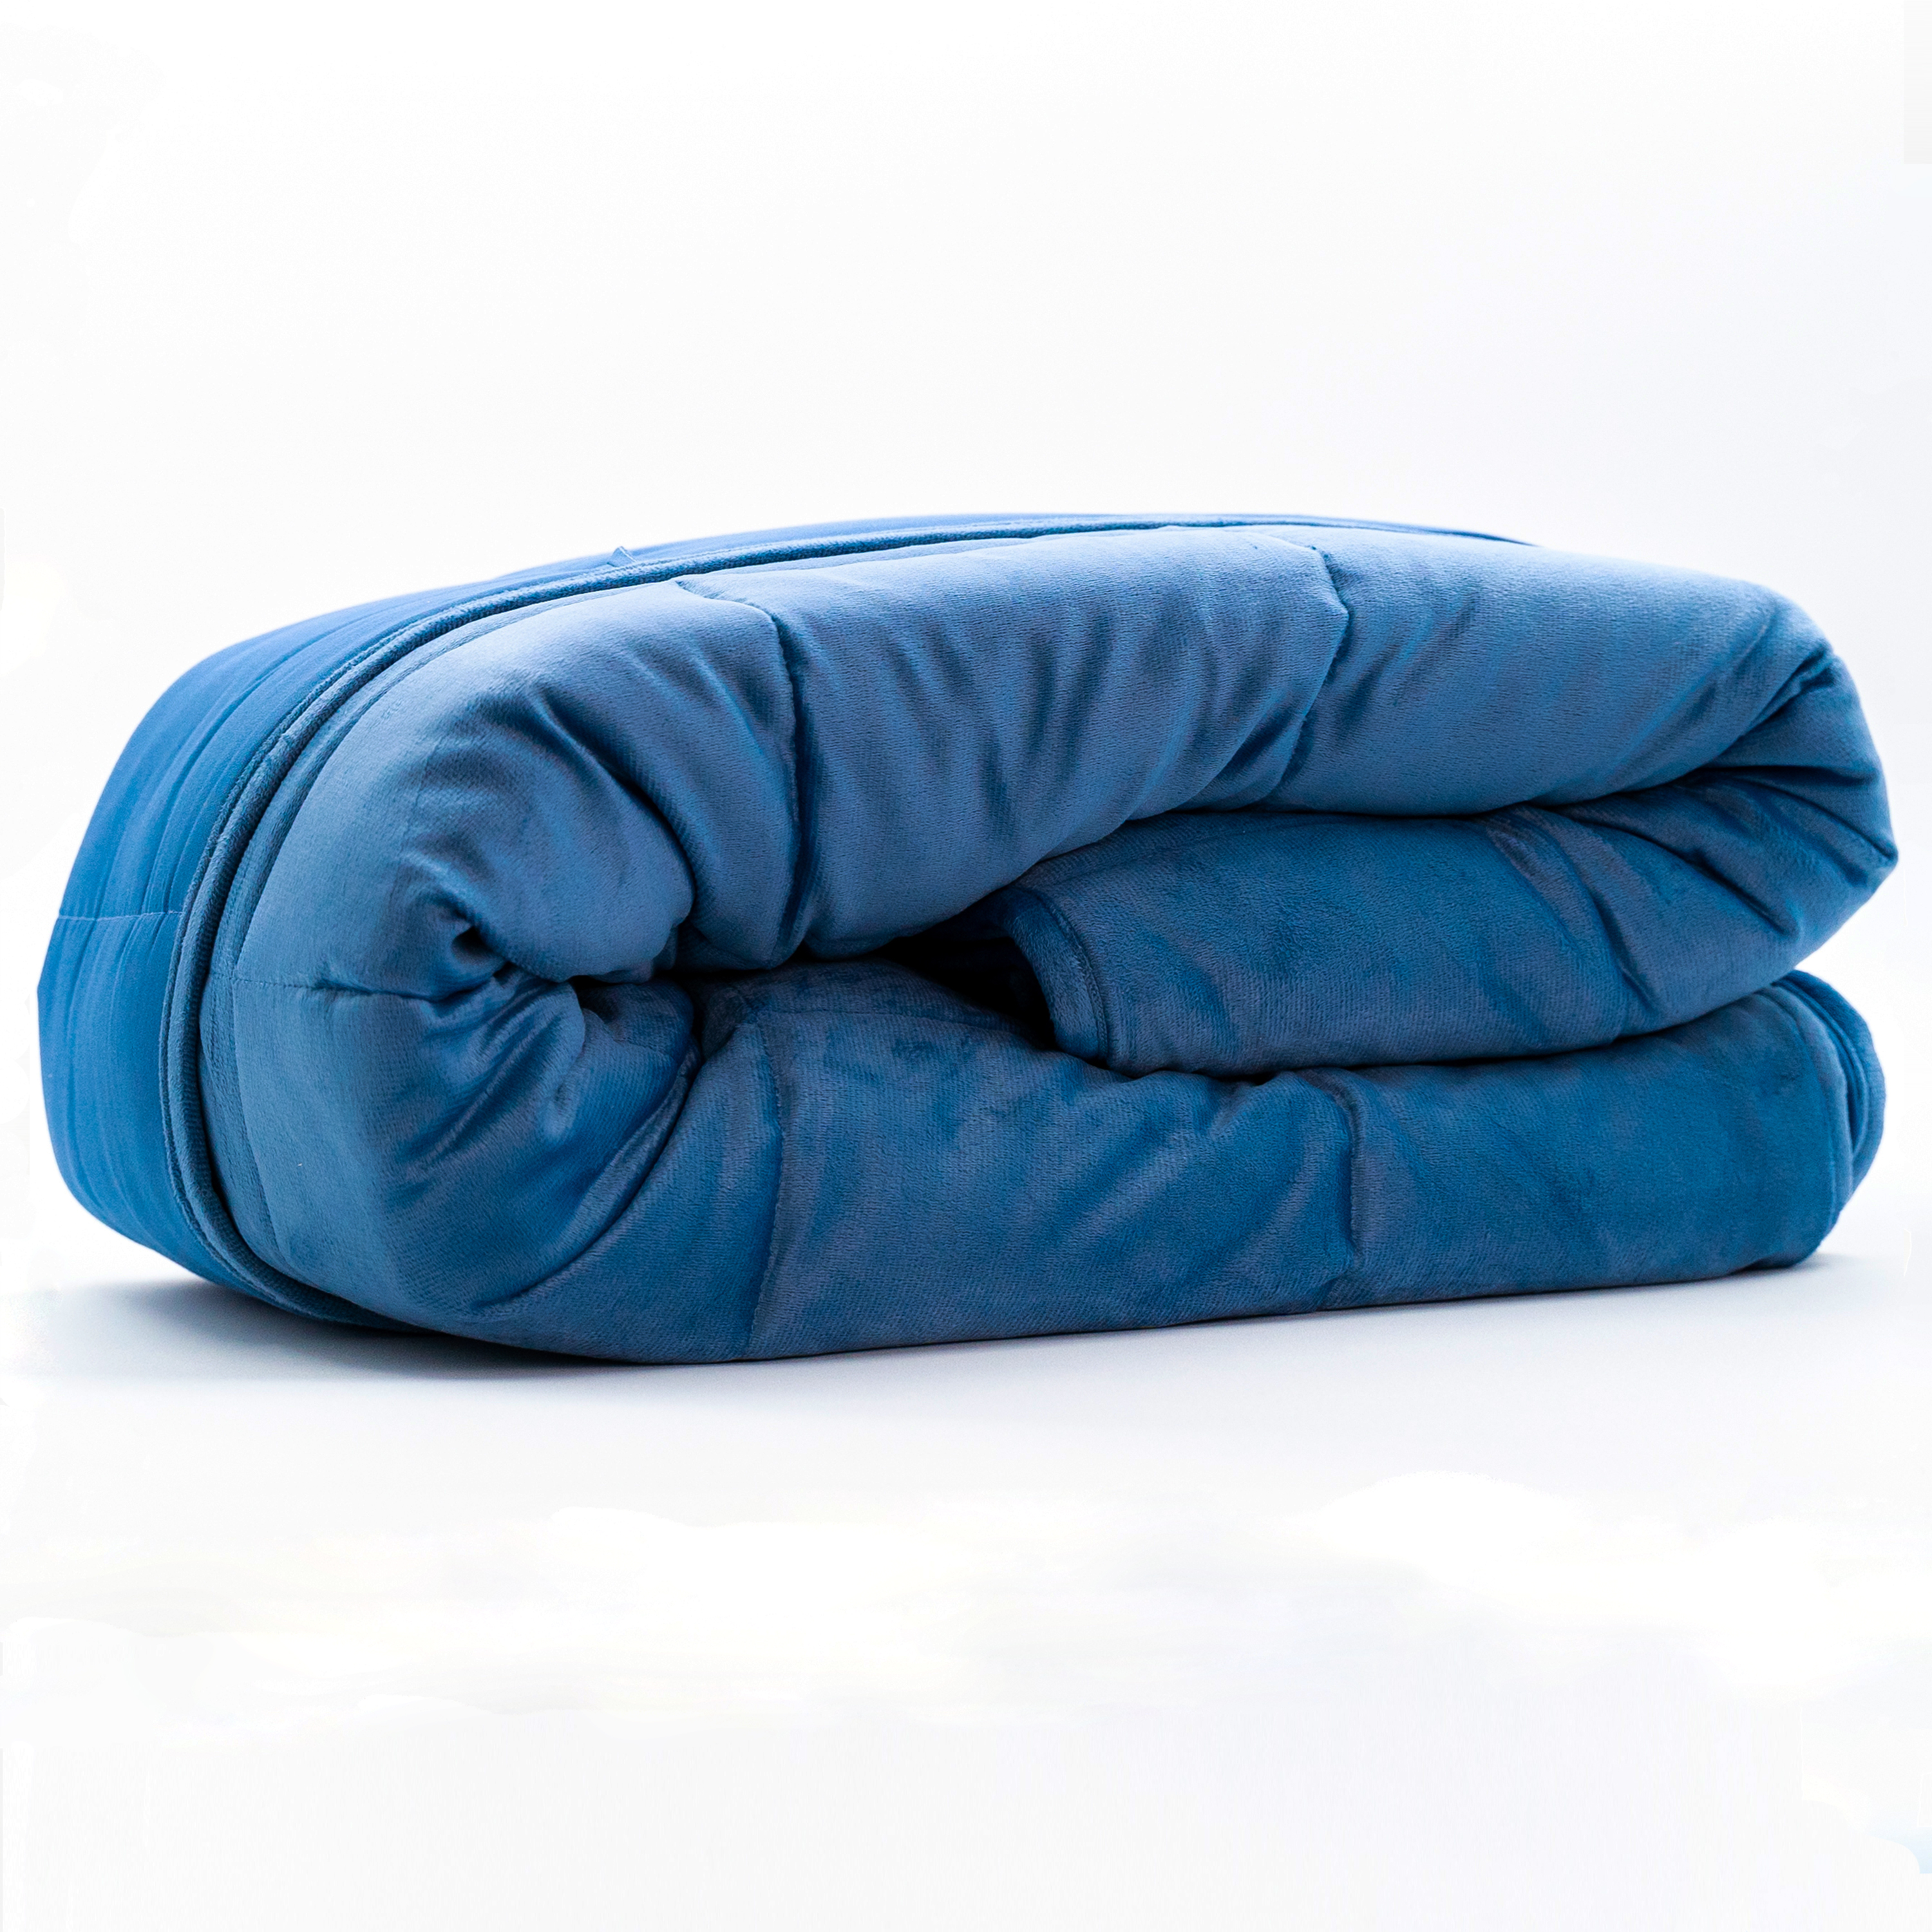 Tranquility Temperature Balancing 12lb Weighted Blanket, Midnight Blue - image 1 of 6